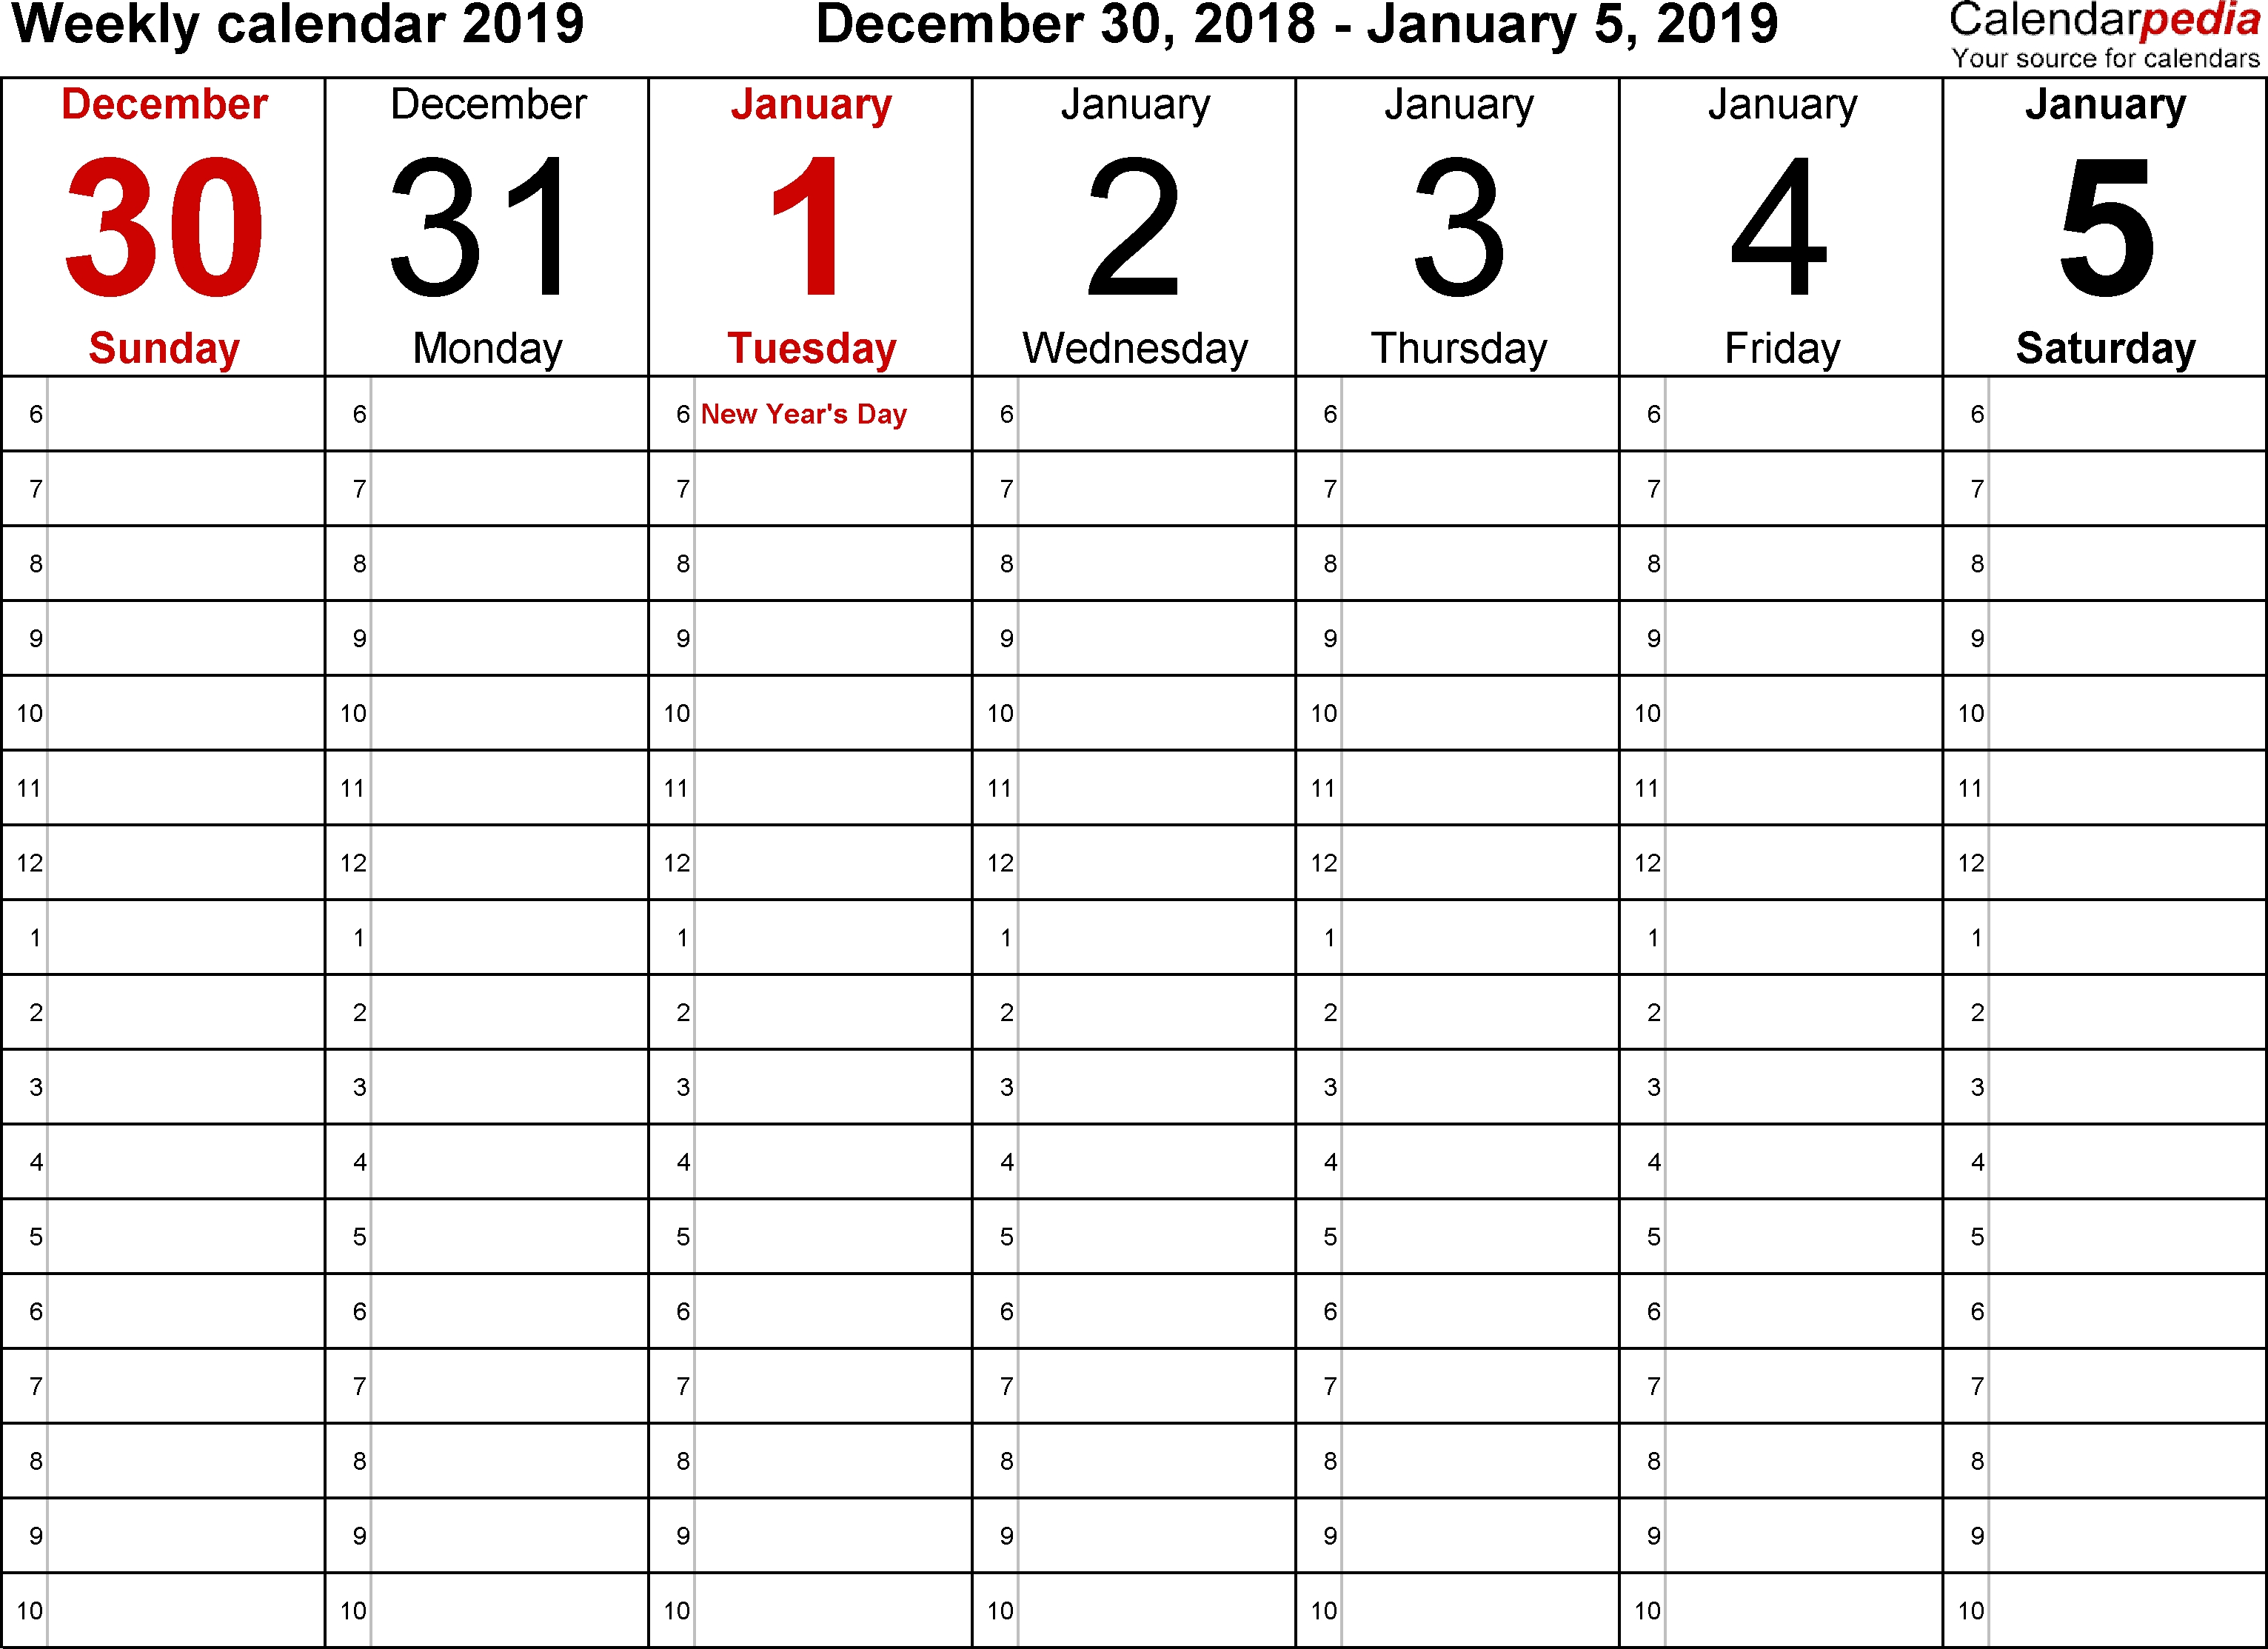 Weekly Calendar 2019 For Word - 12 Free Printable Templates with regard to Weekly Calendar With Hours Printable